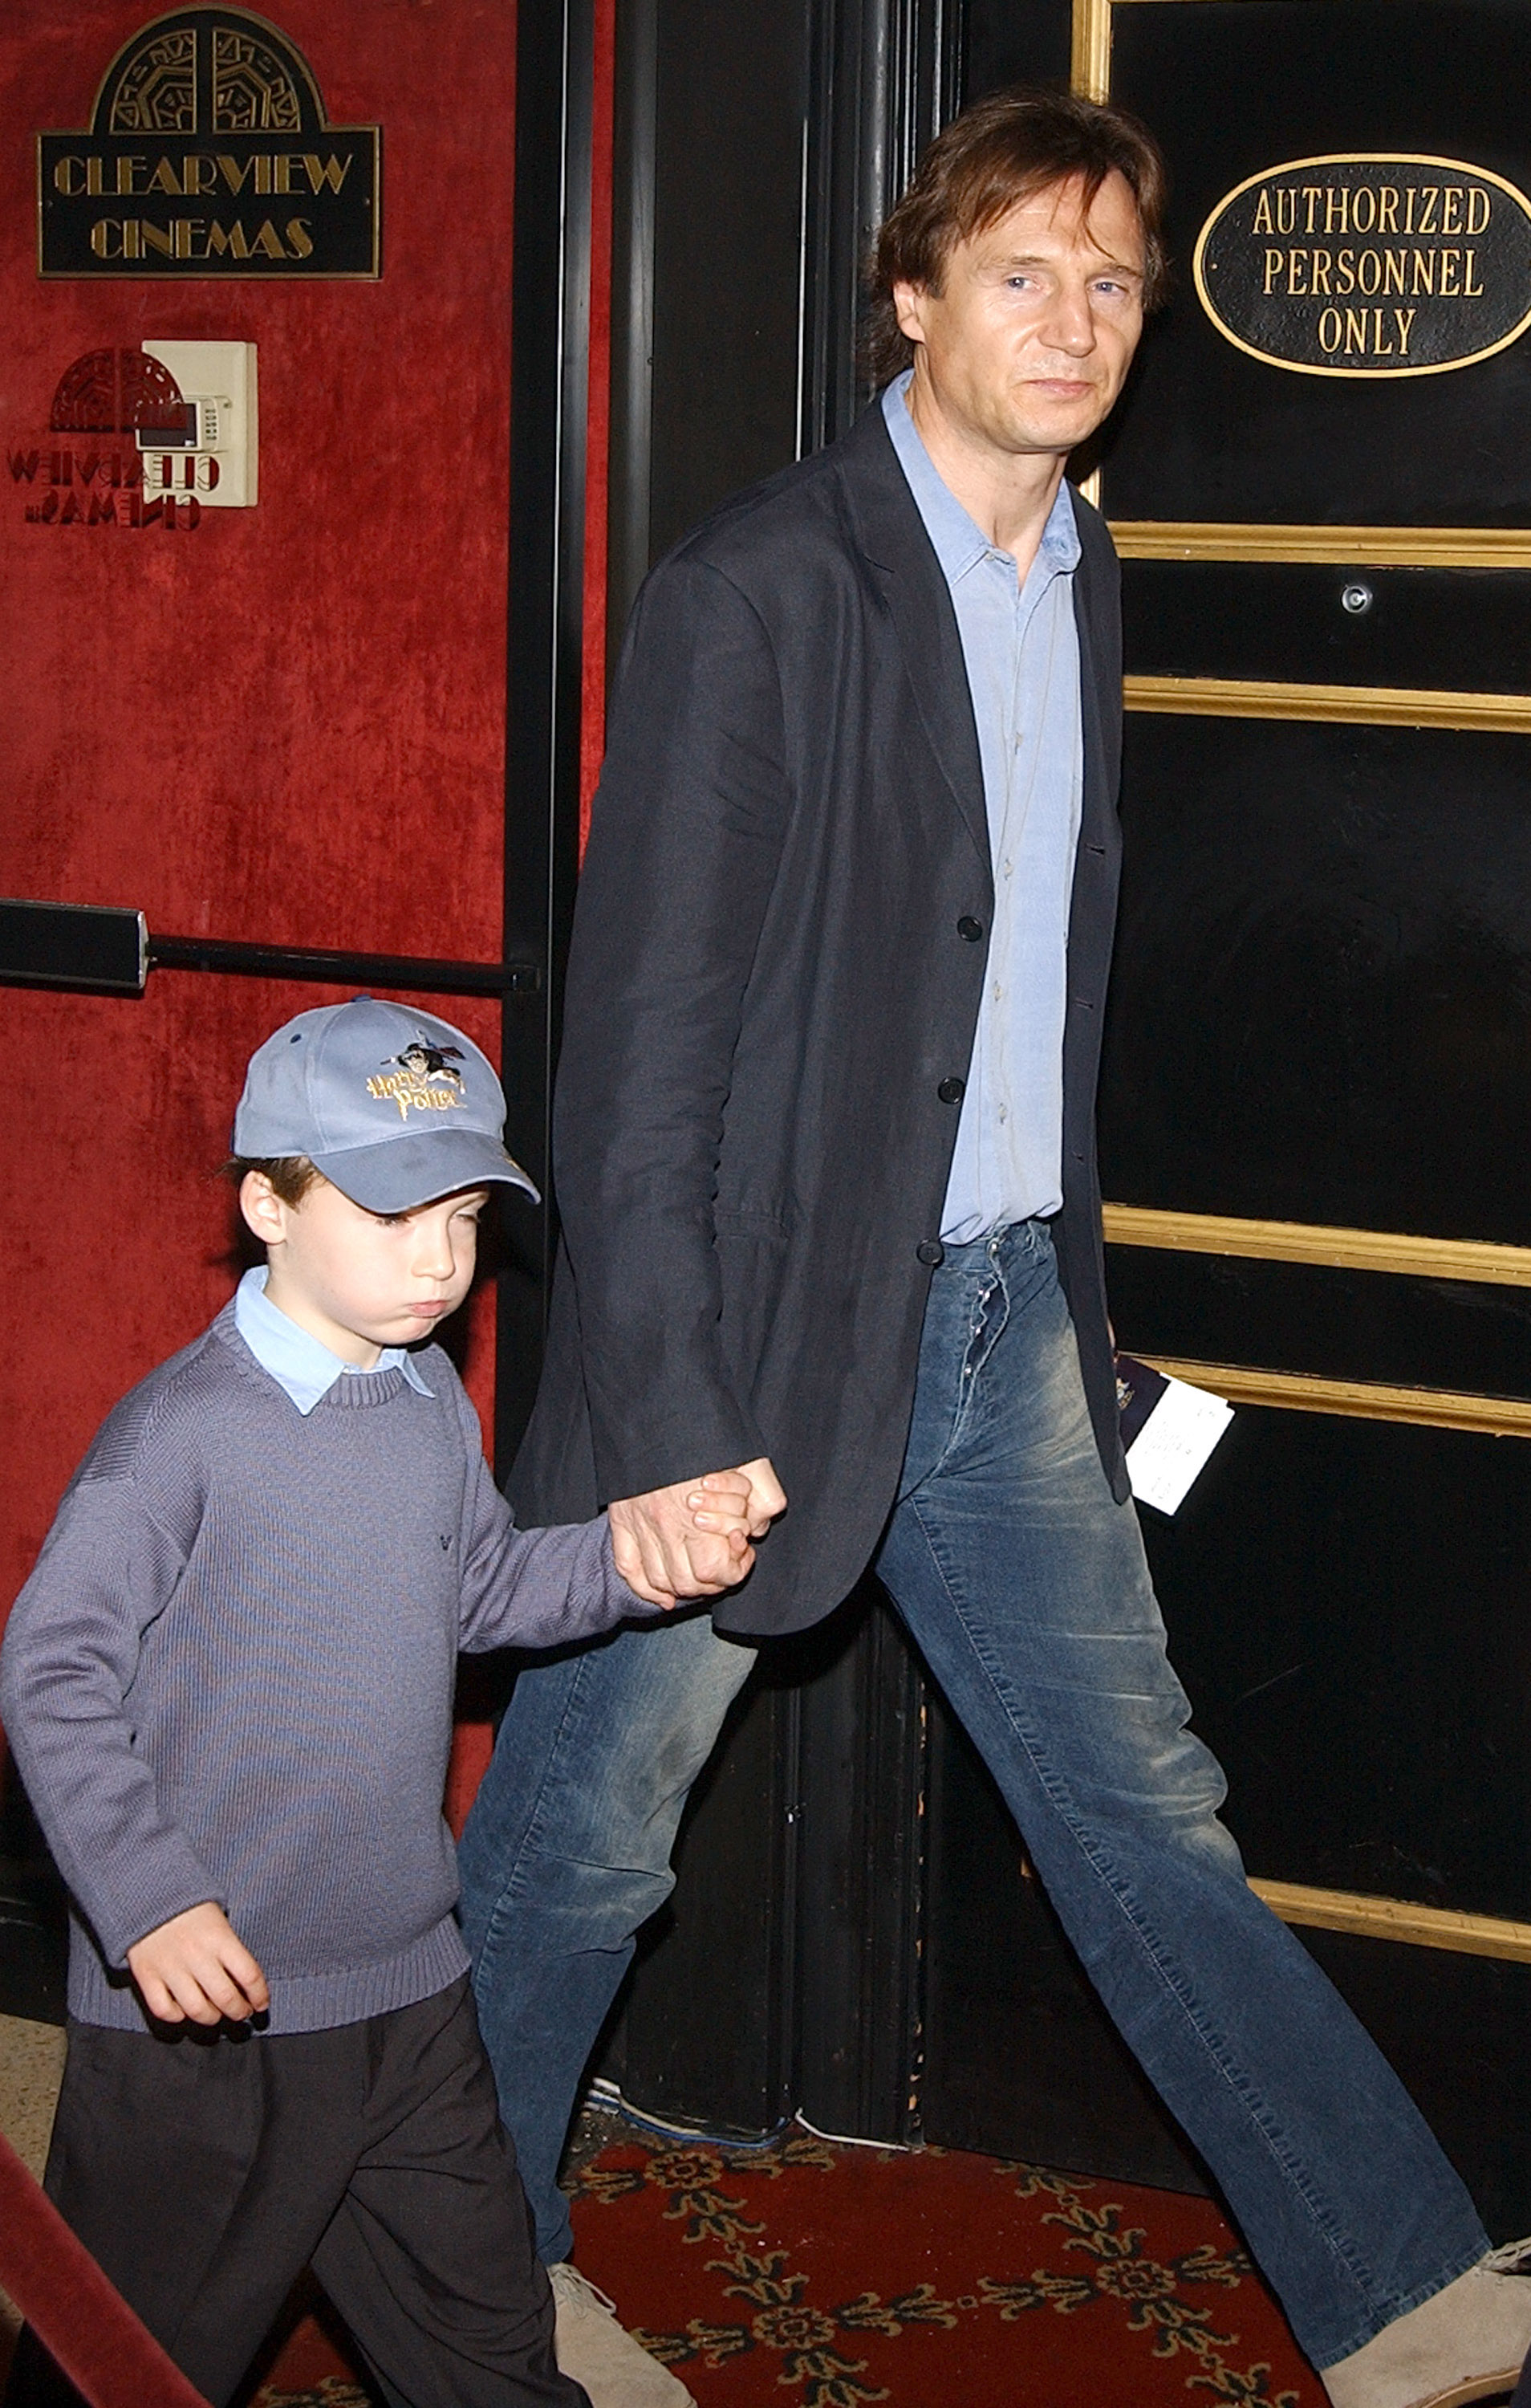 Liam Neeson and his son during the "Harry Potter and the Chamber of Secrets" New York premiere in New York City, New York on November 10, 2002 | Source: Getty Images